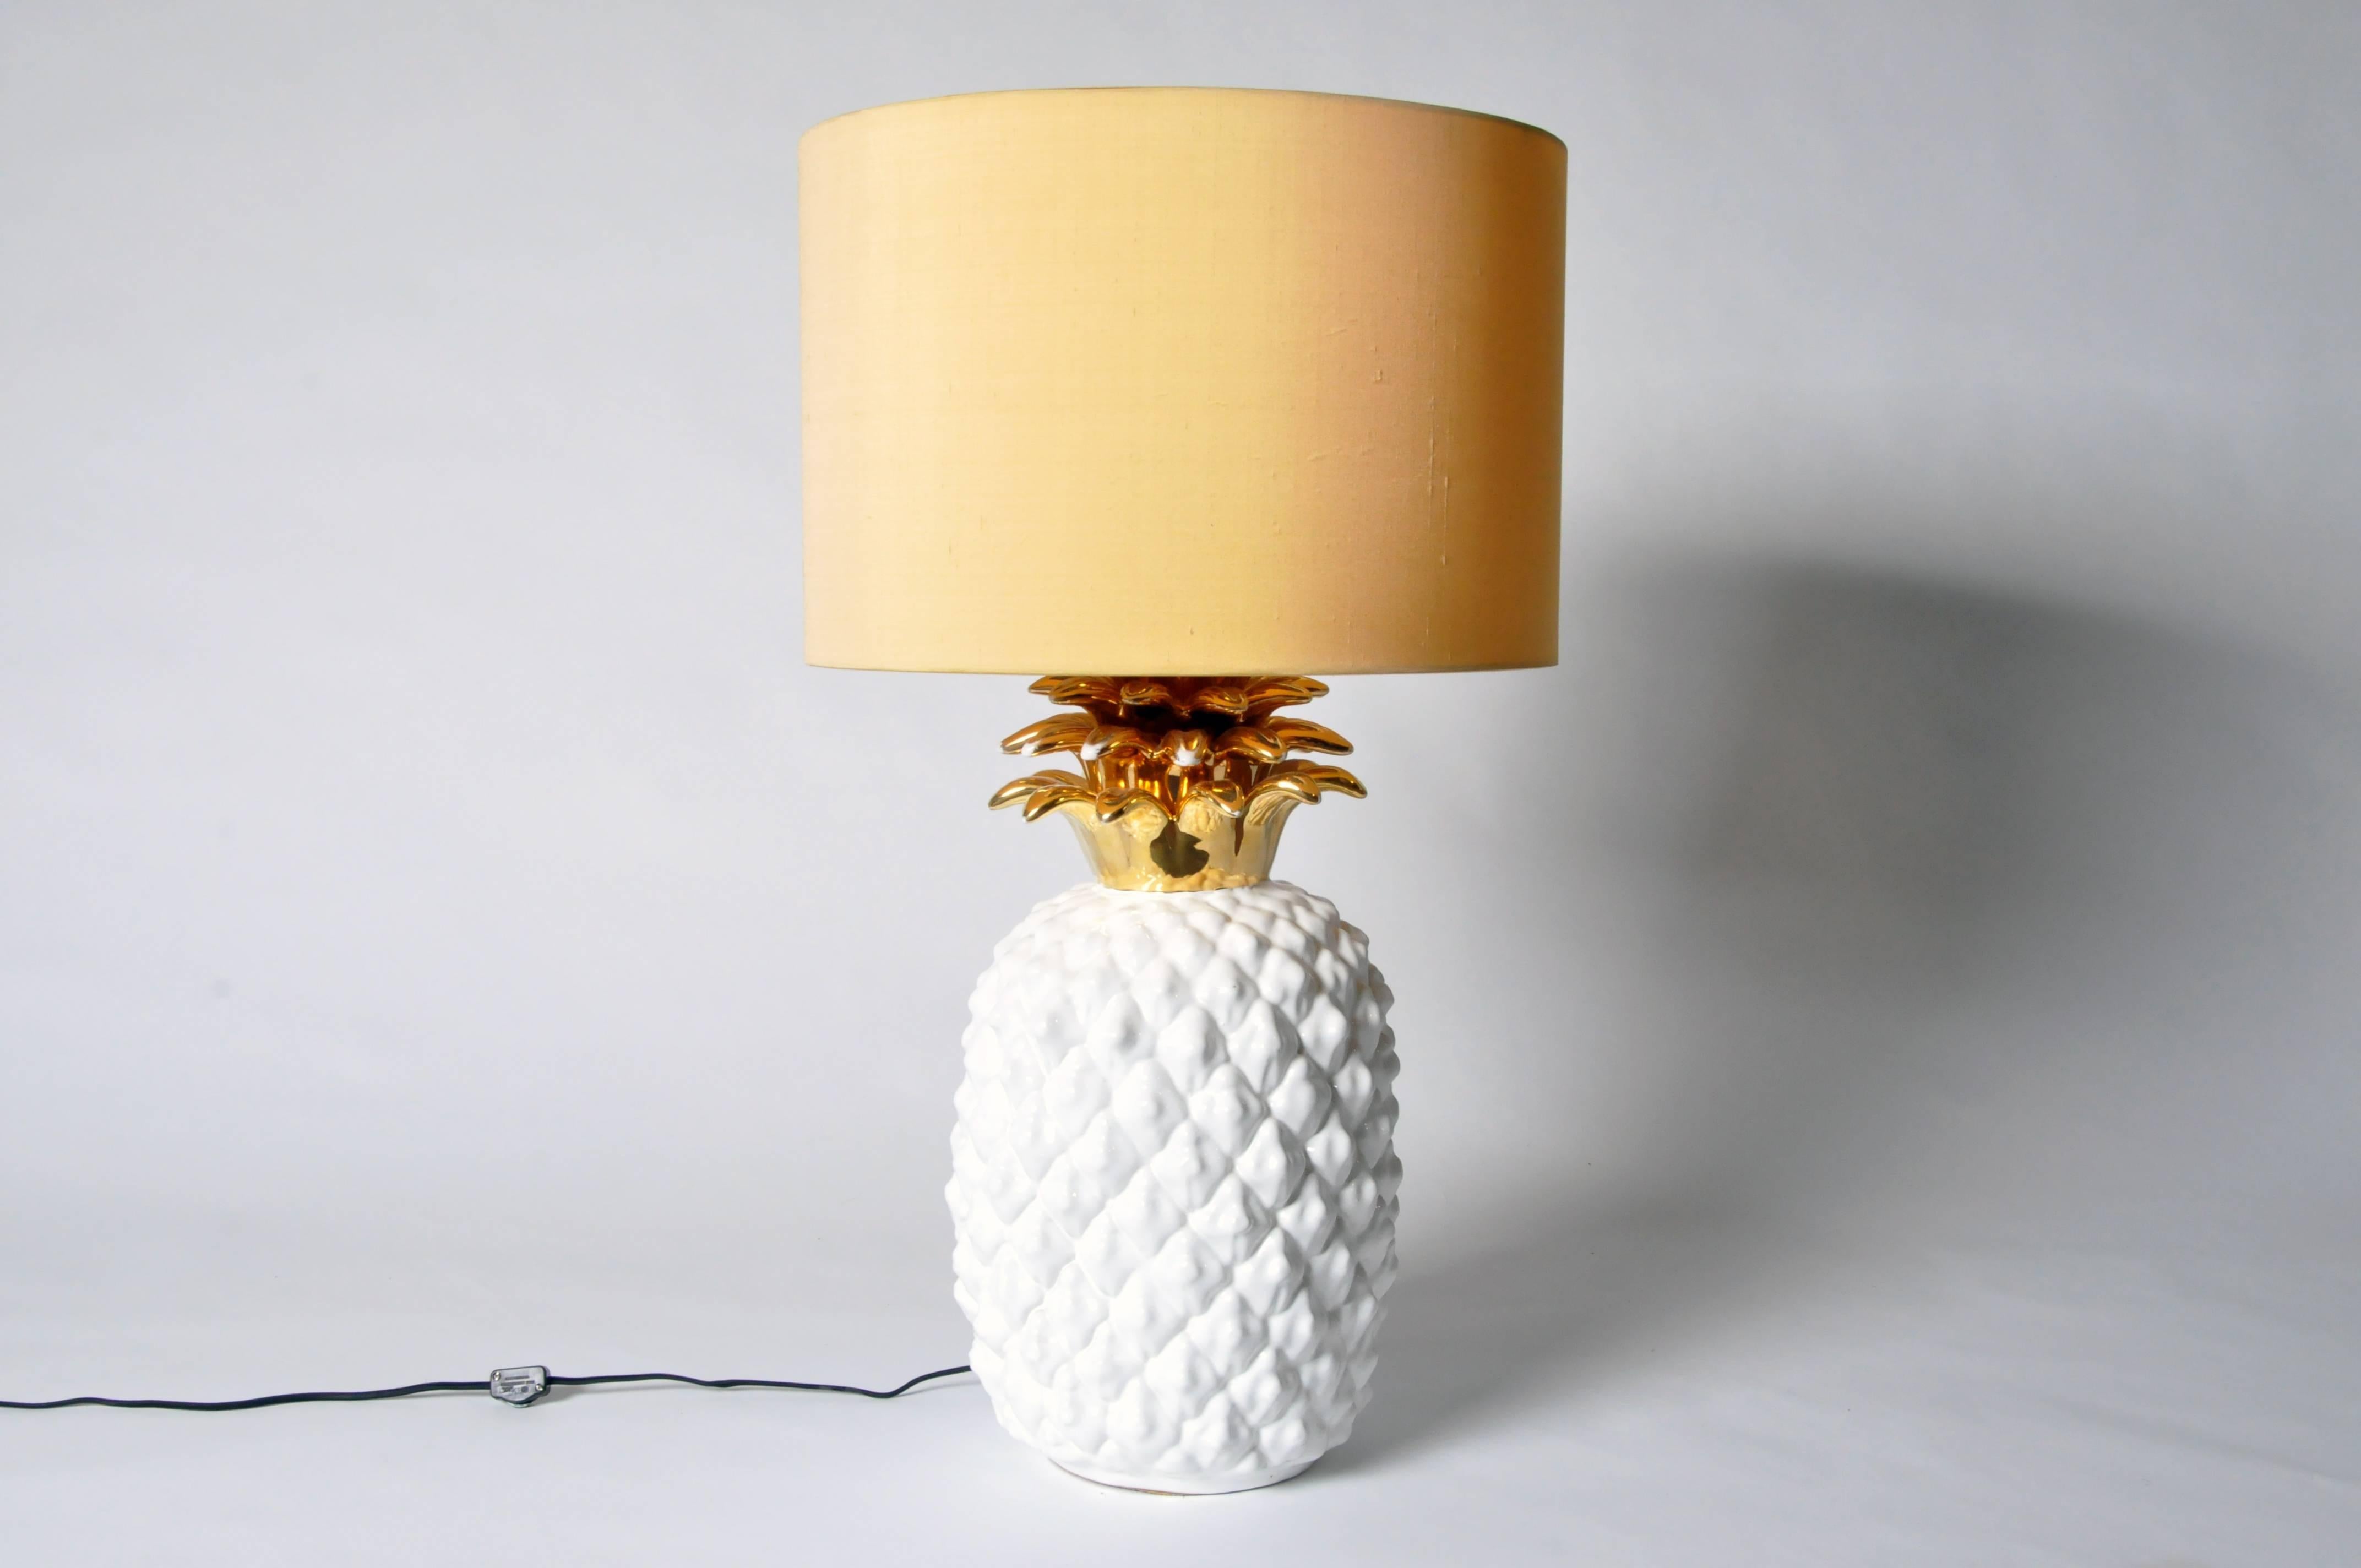 This charming and quirky lamp has a hollow, textured cylindrical body. The five-tier crown of radiating pointed leaves features a metallic gold finish—giving it a delightful pop of color.